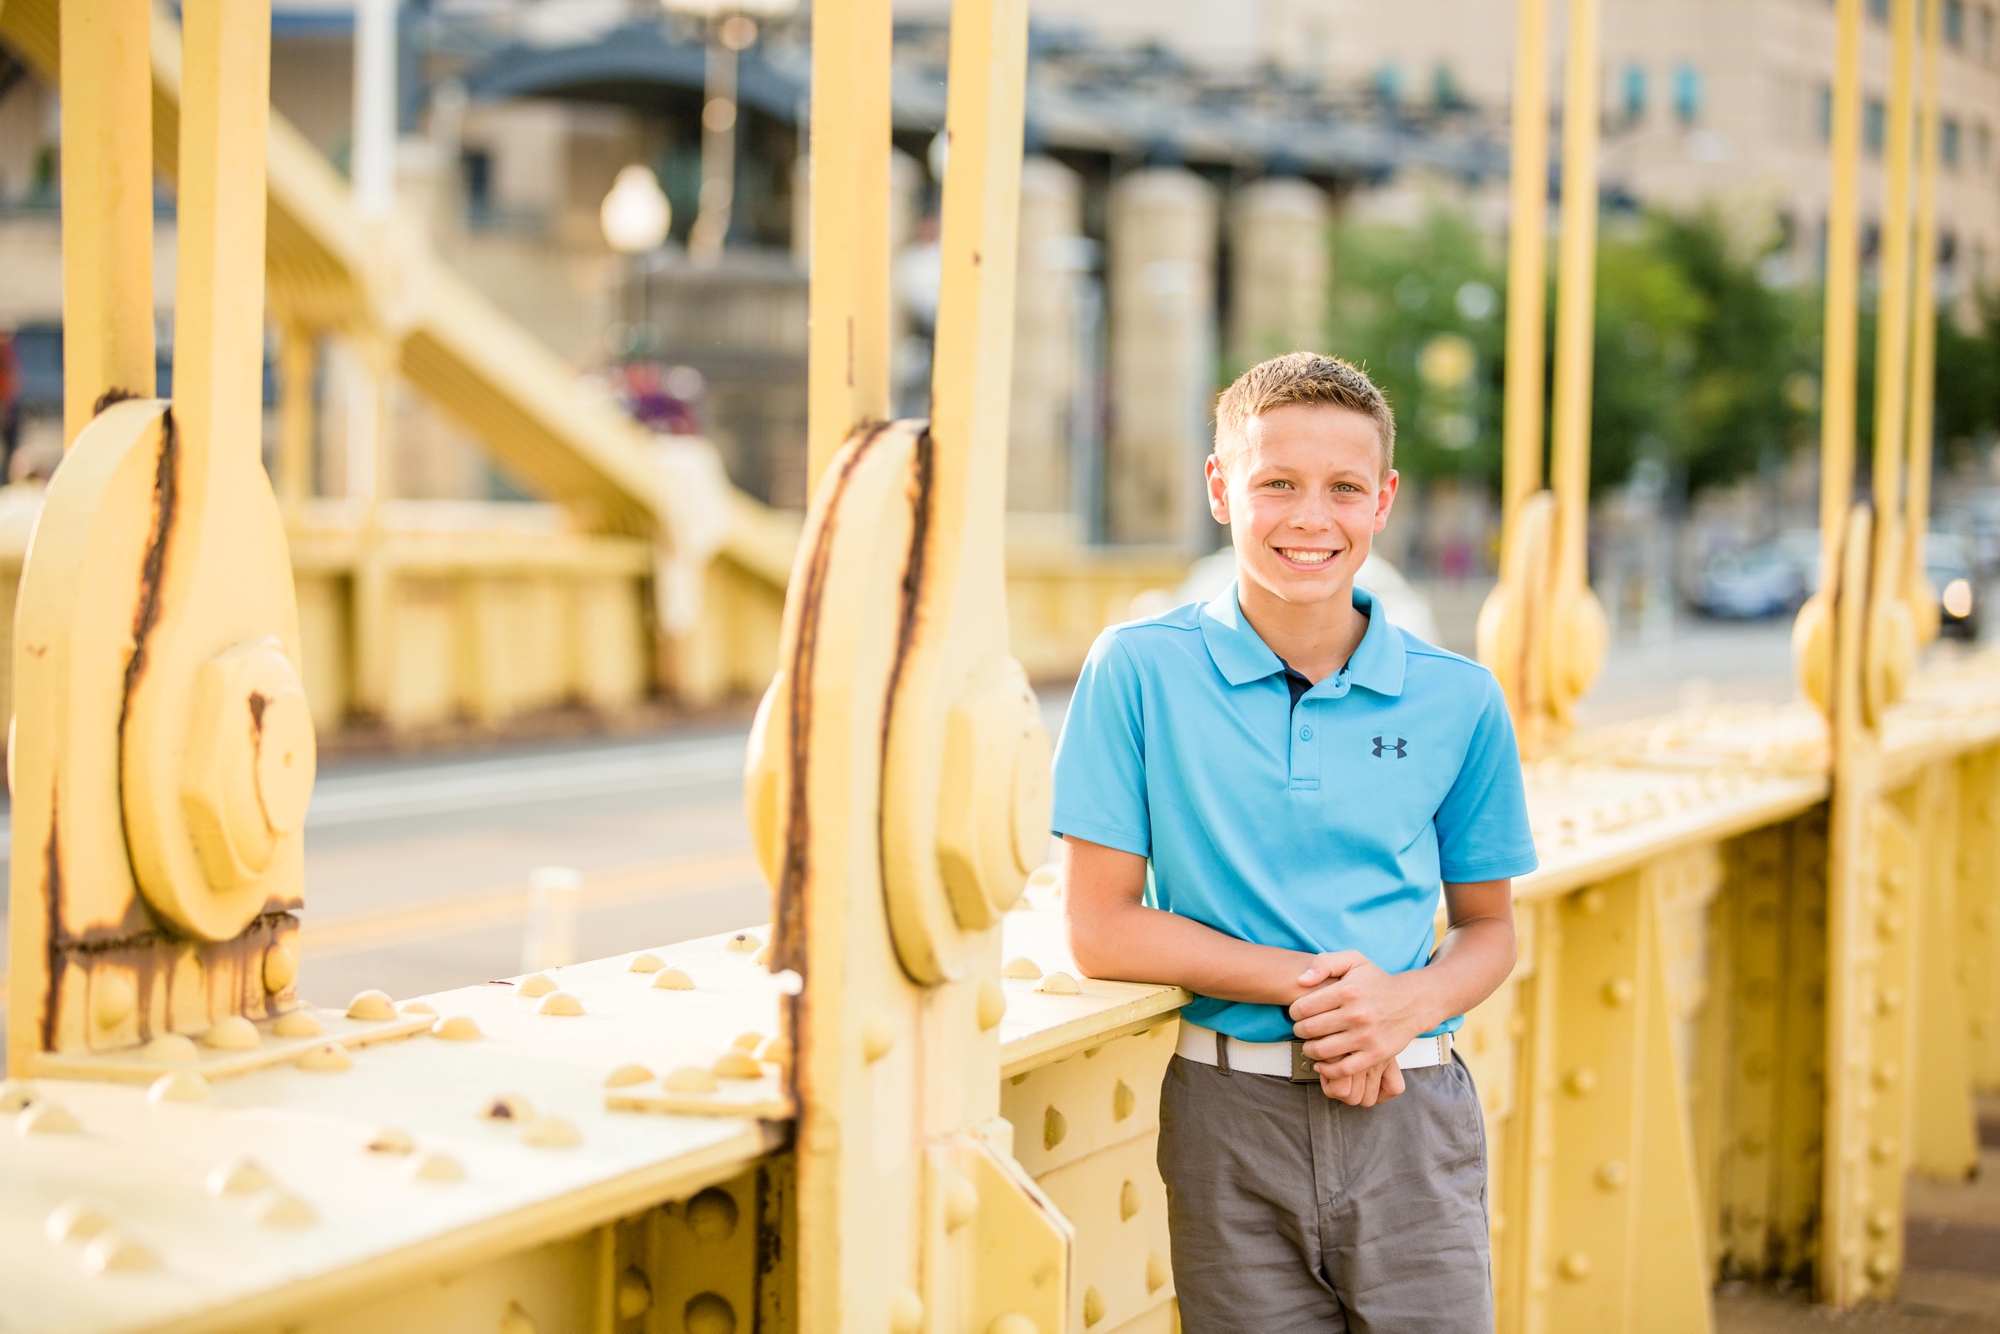 north shore family photos, pittsburgh family photographer, locations in pittsburgh for photo shoot, cranberry township family photographer, roberto clemente bridge photos 